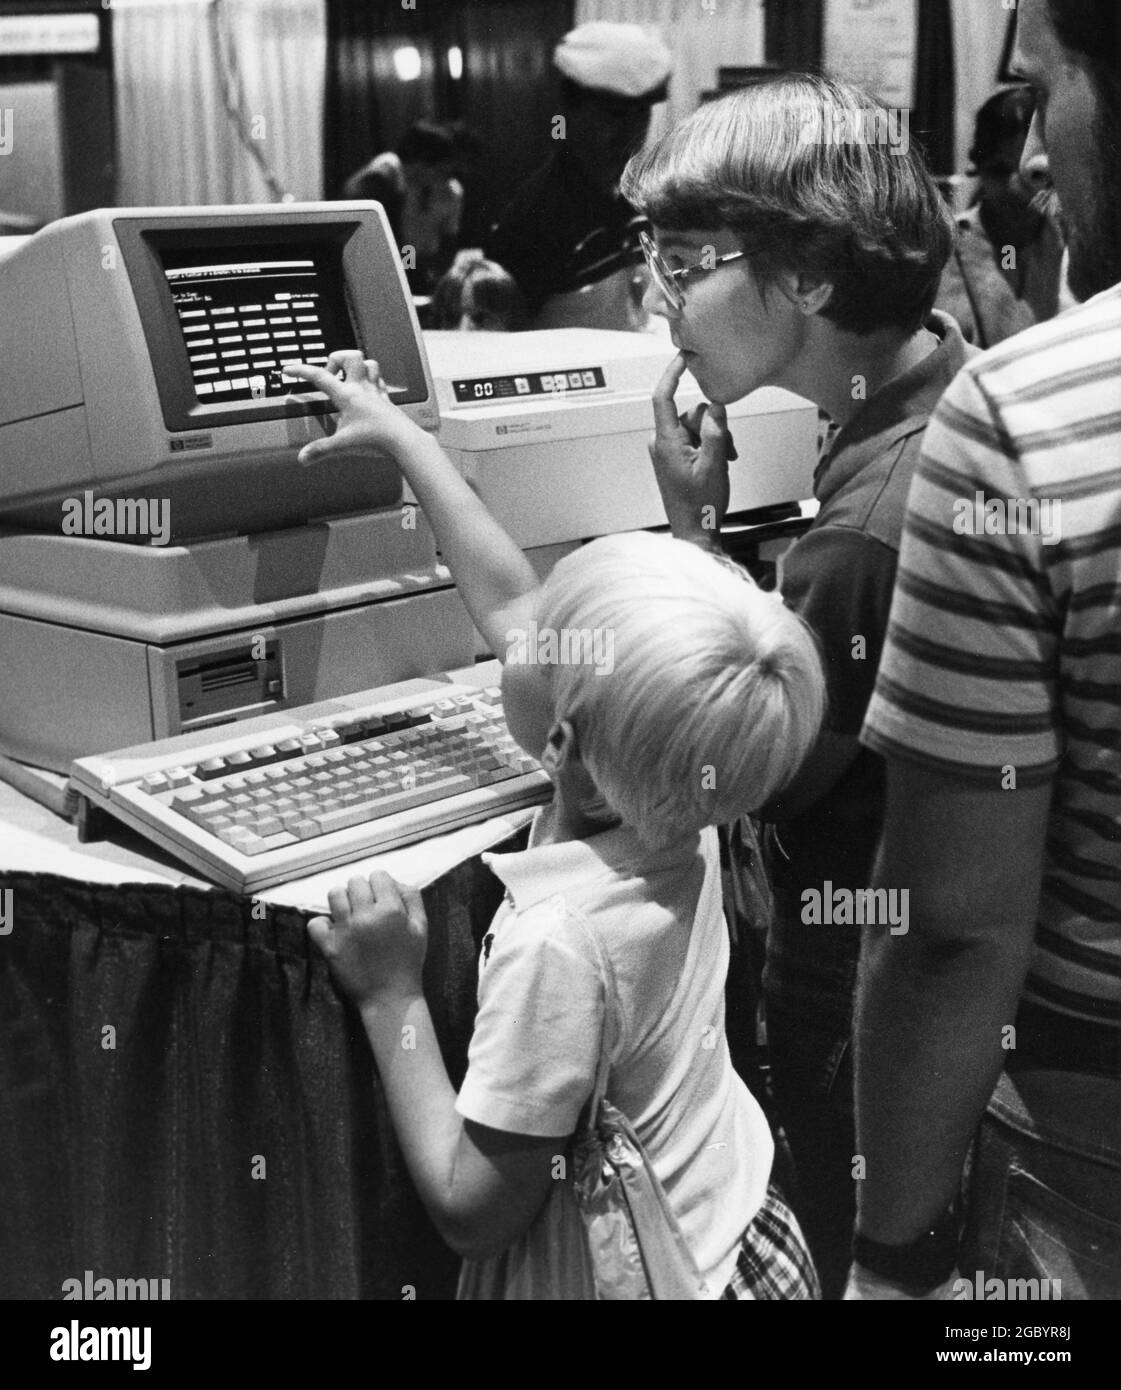 Austin, Texas USA, circa 1986: Young boy checks out new personal computer as mother looks on at technology convention trade show display. ©Bob Daemmrich Stock Photo